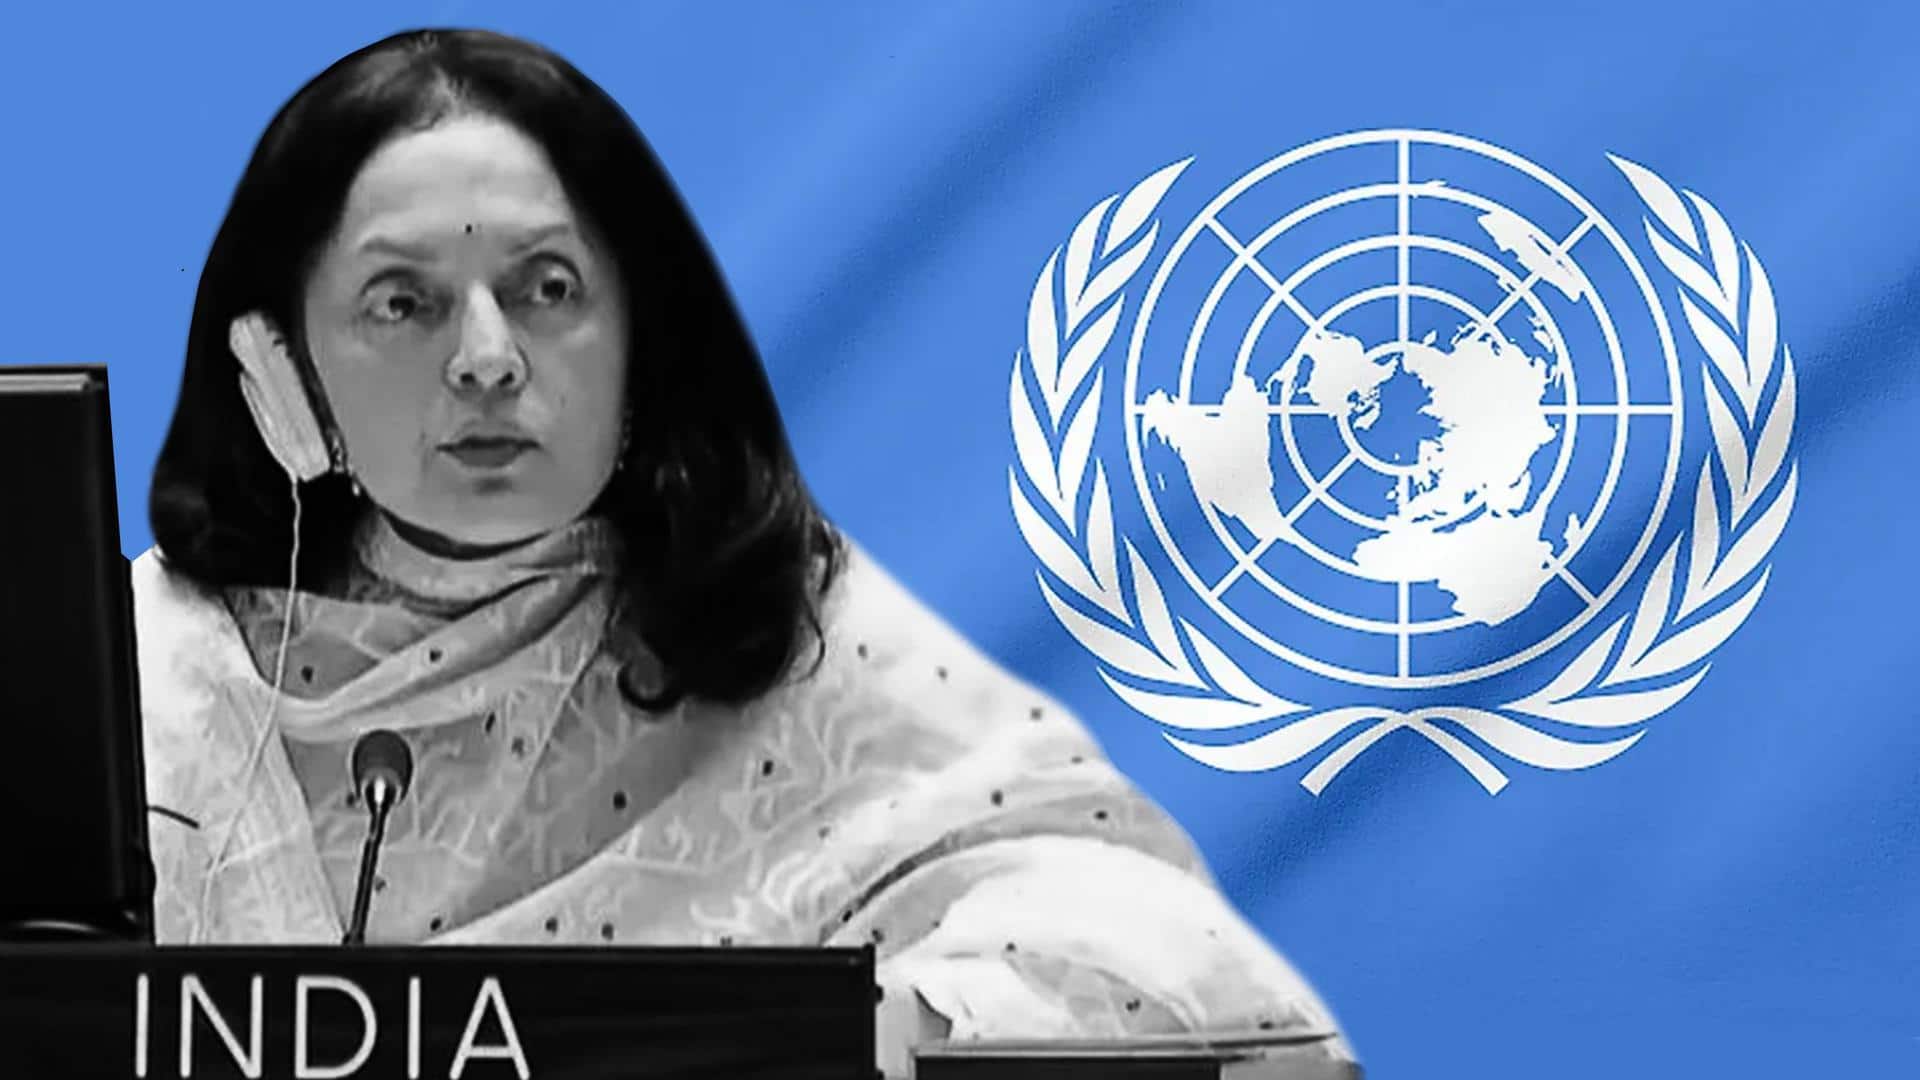 Don't tell what to do on democracy: India at UN